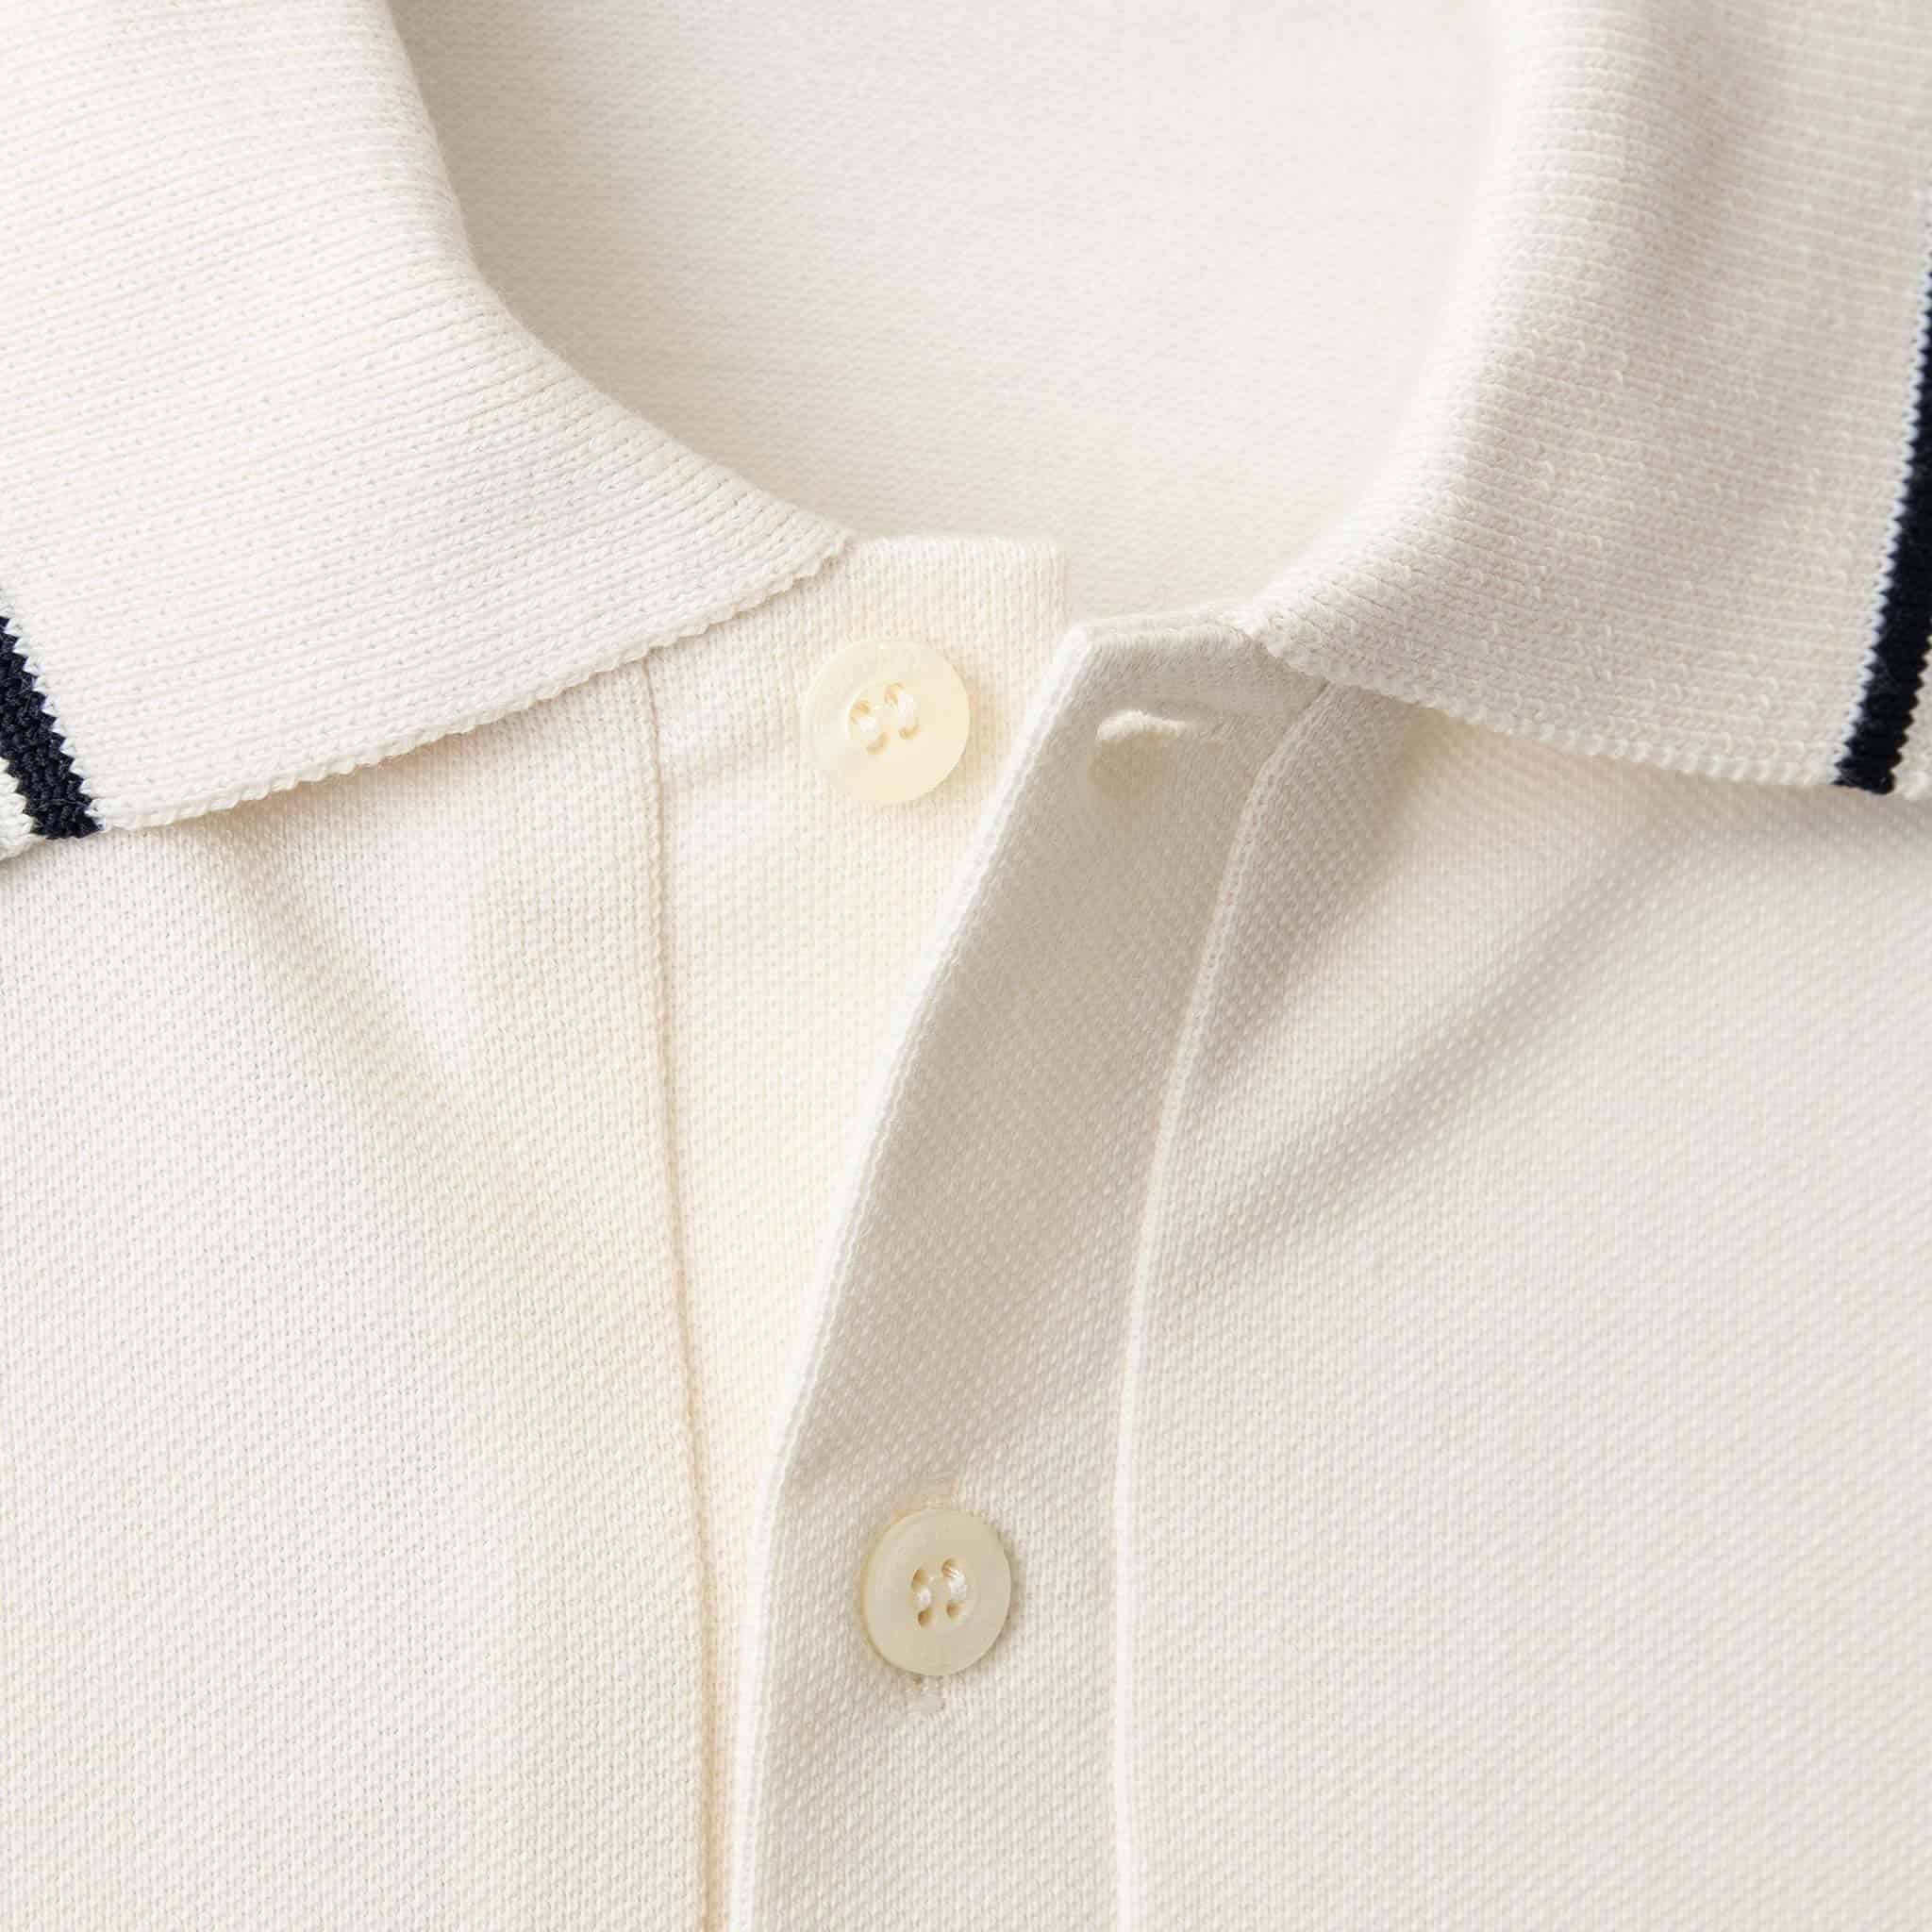 FRED PERRY TWIN TIPPED FRED PERRY SHIRT M12